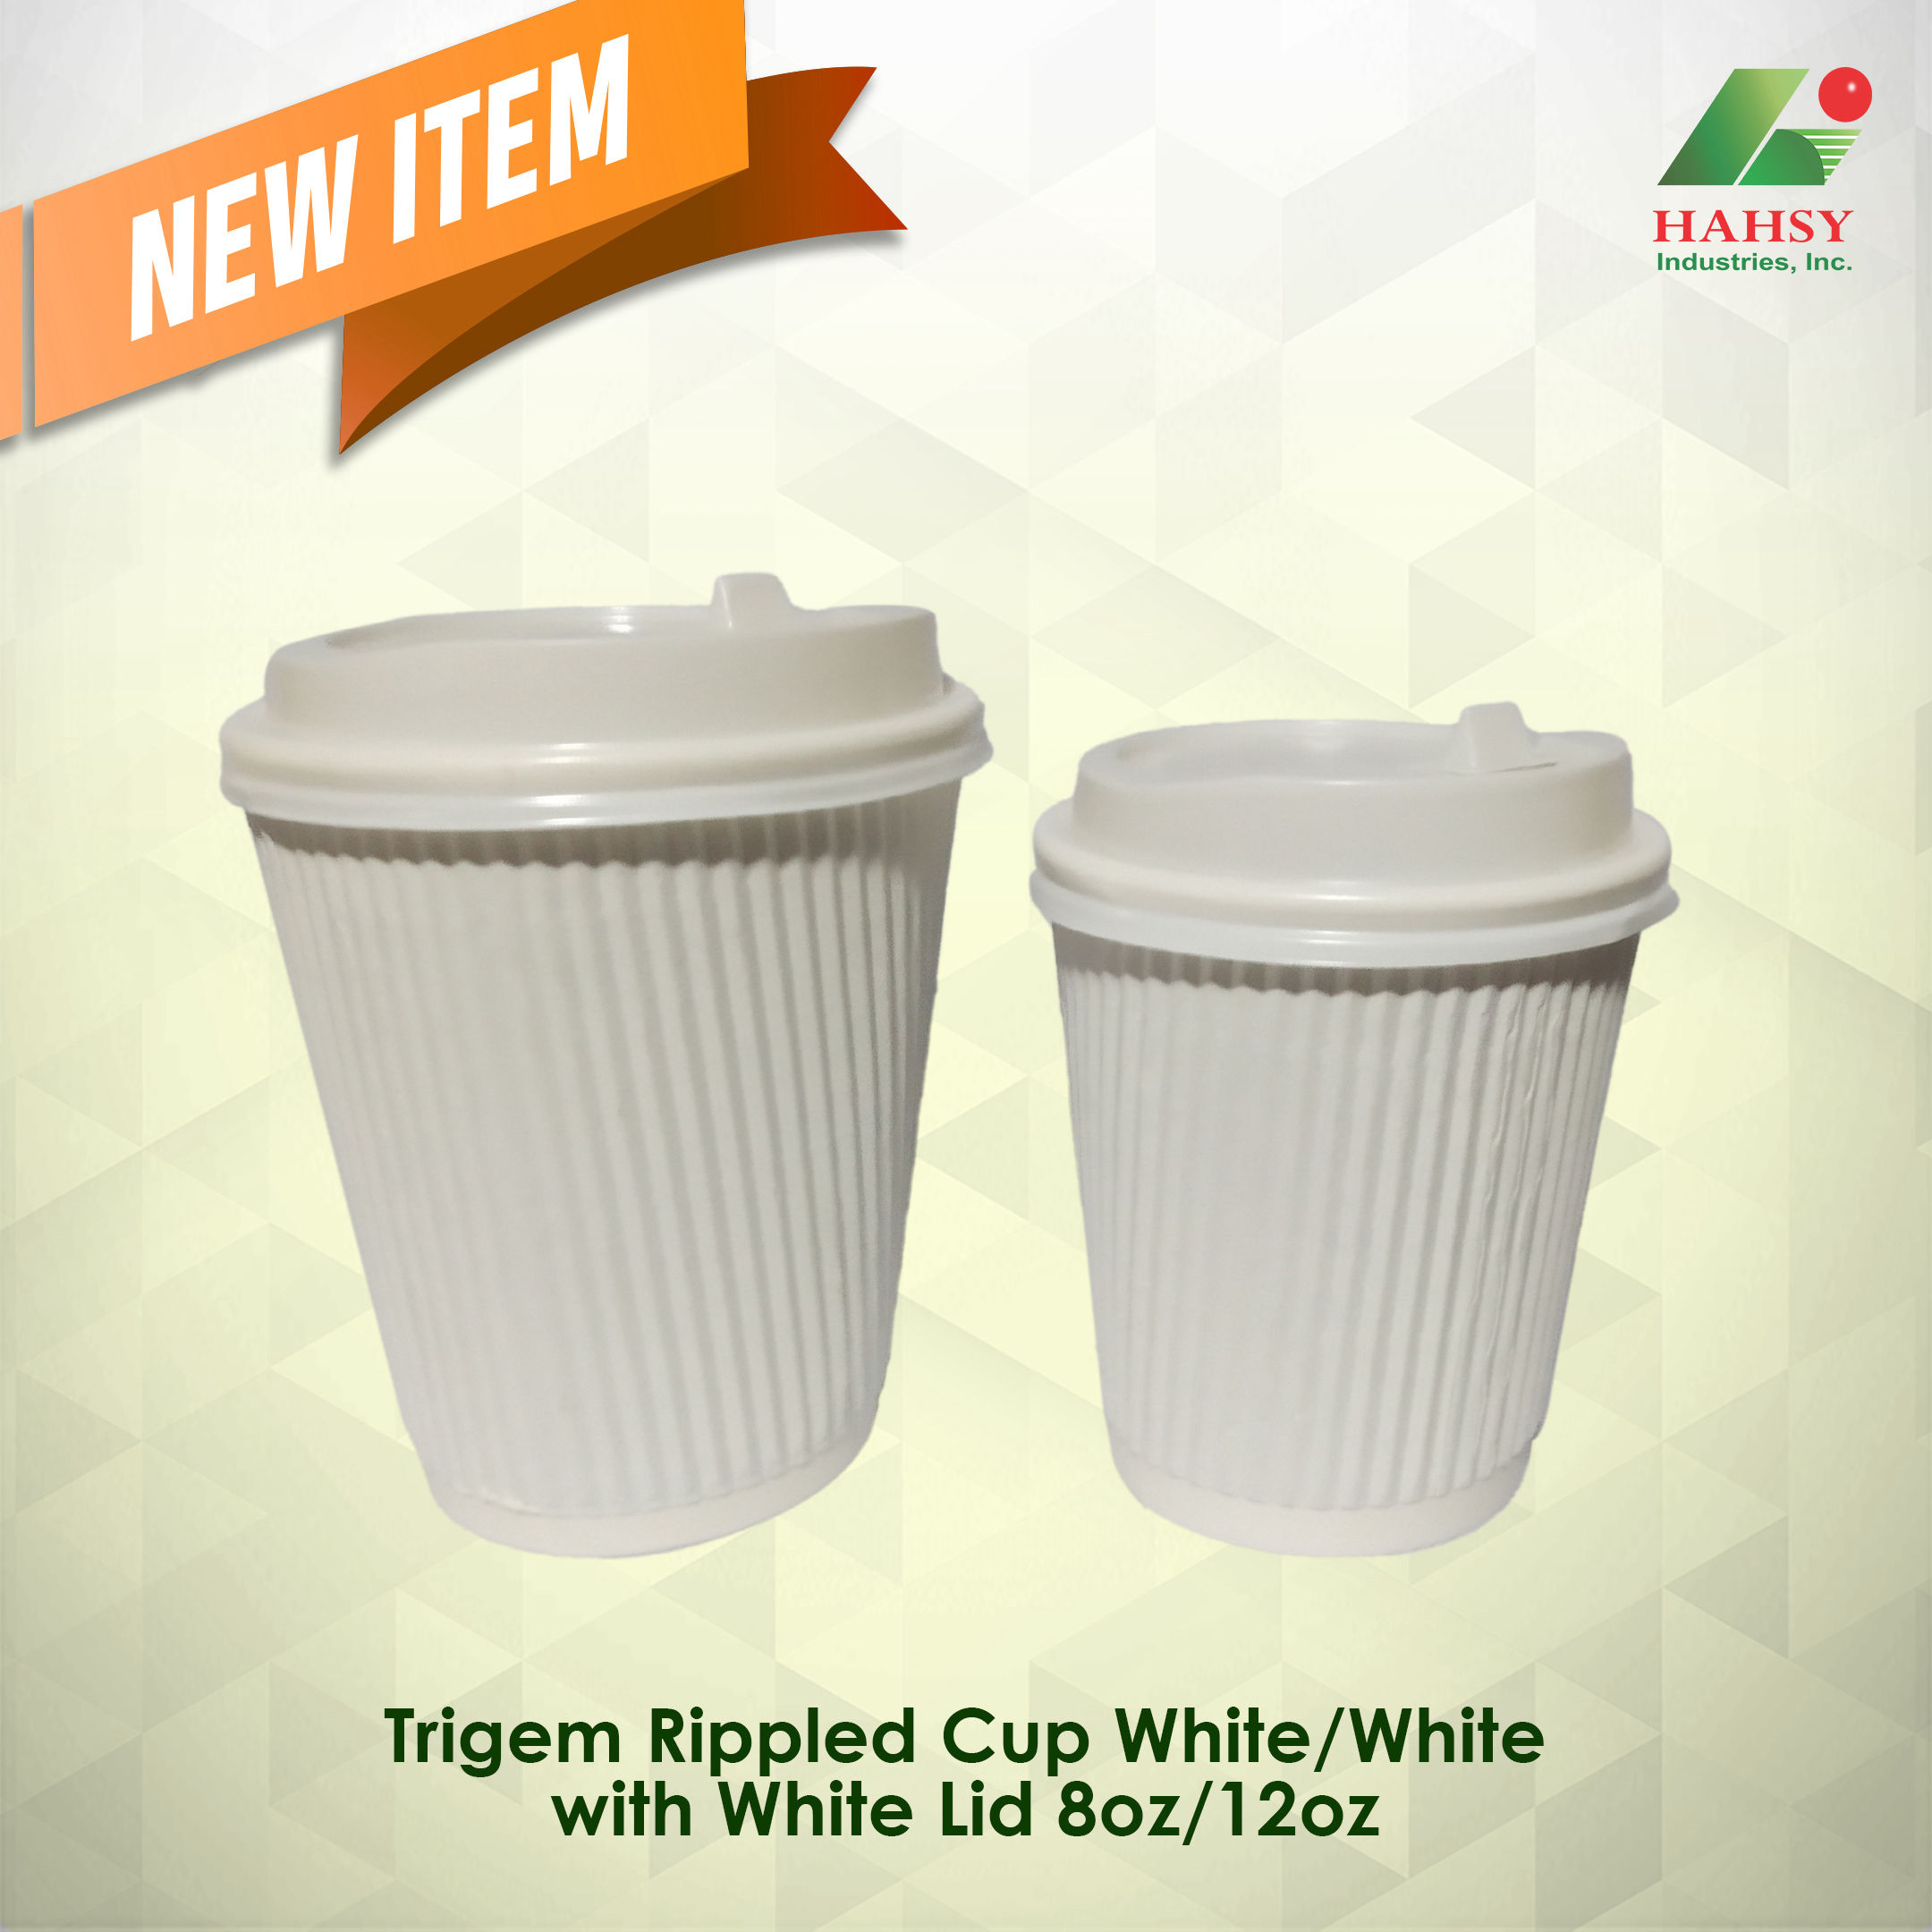 Trigem Rippled cup white with white lid 8oz 12oz